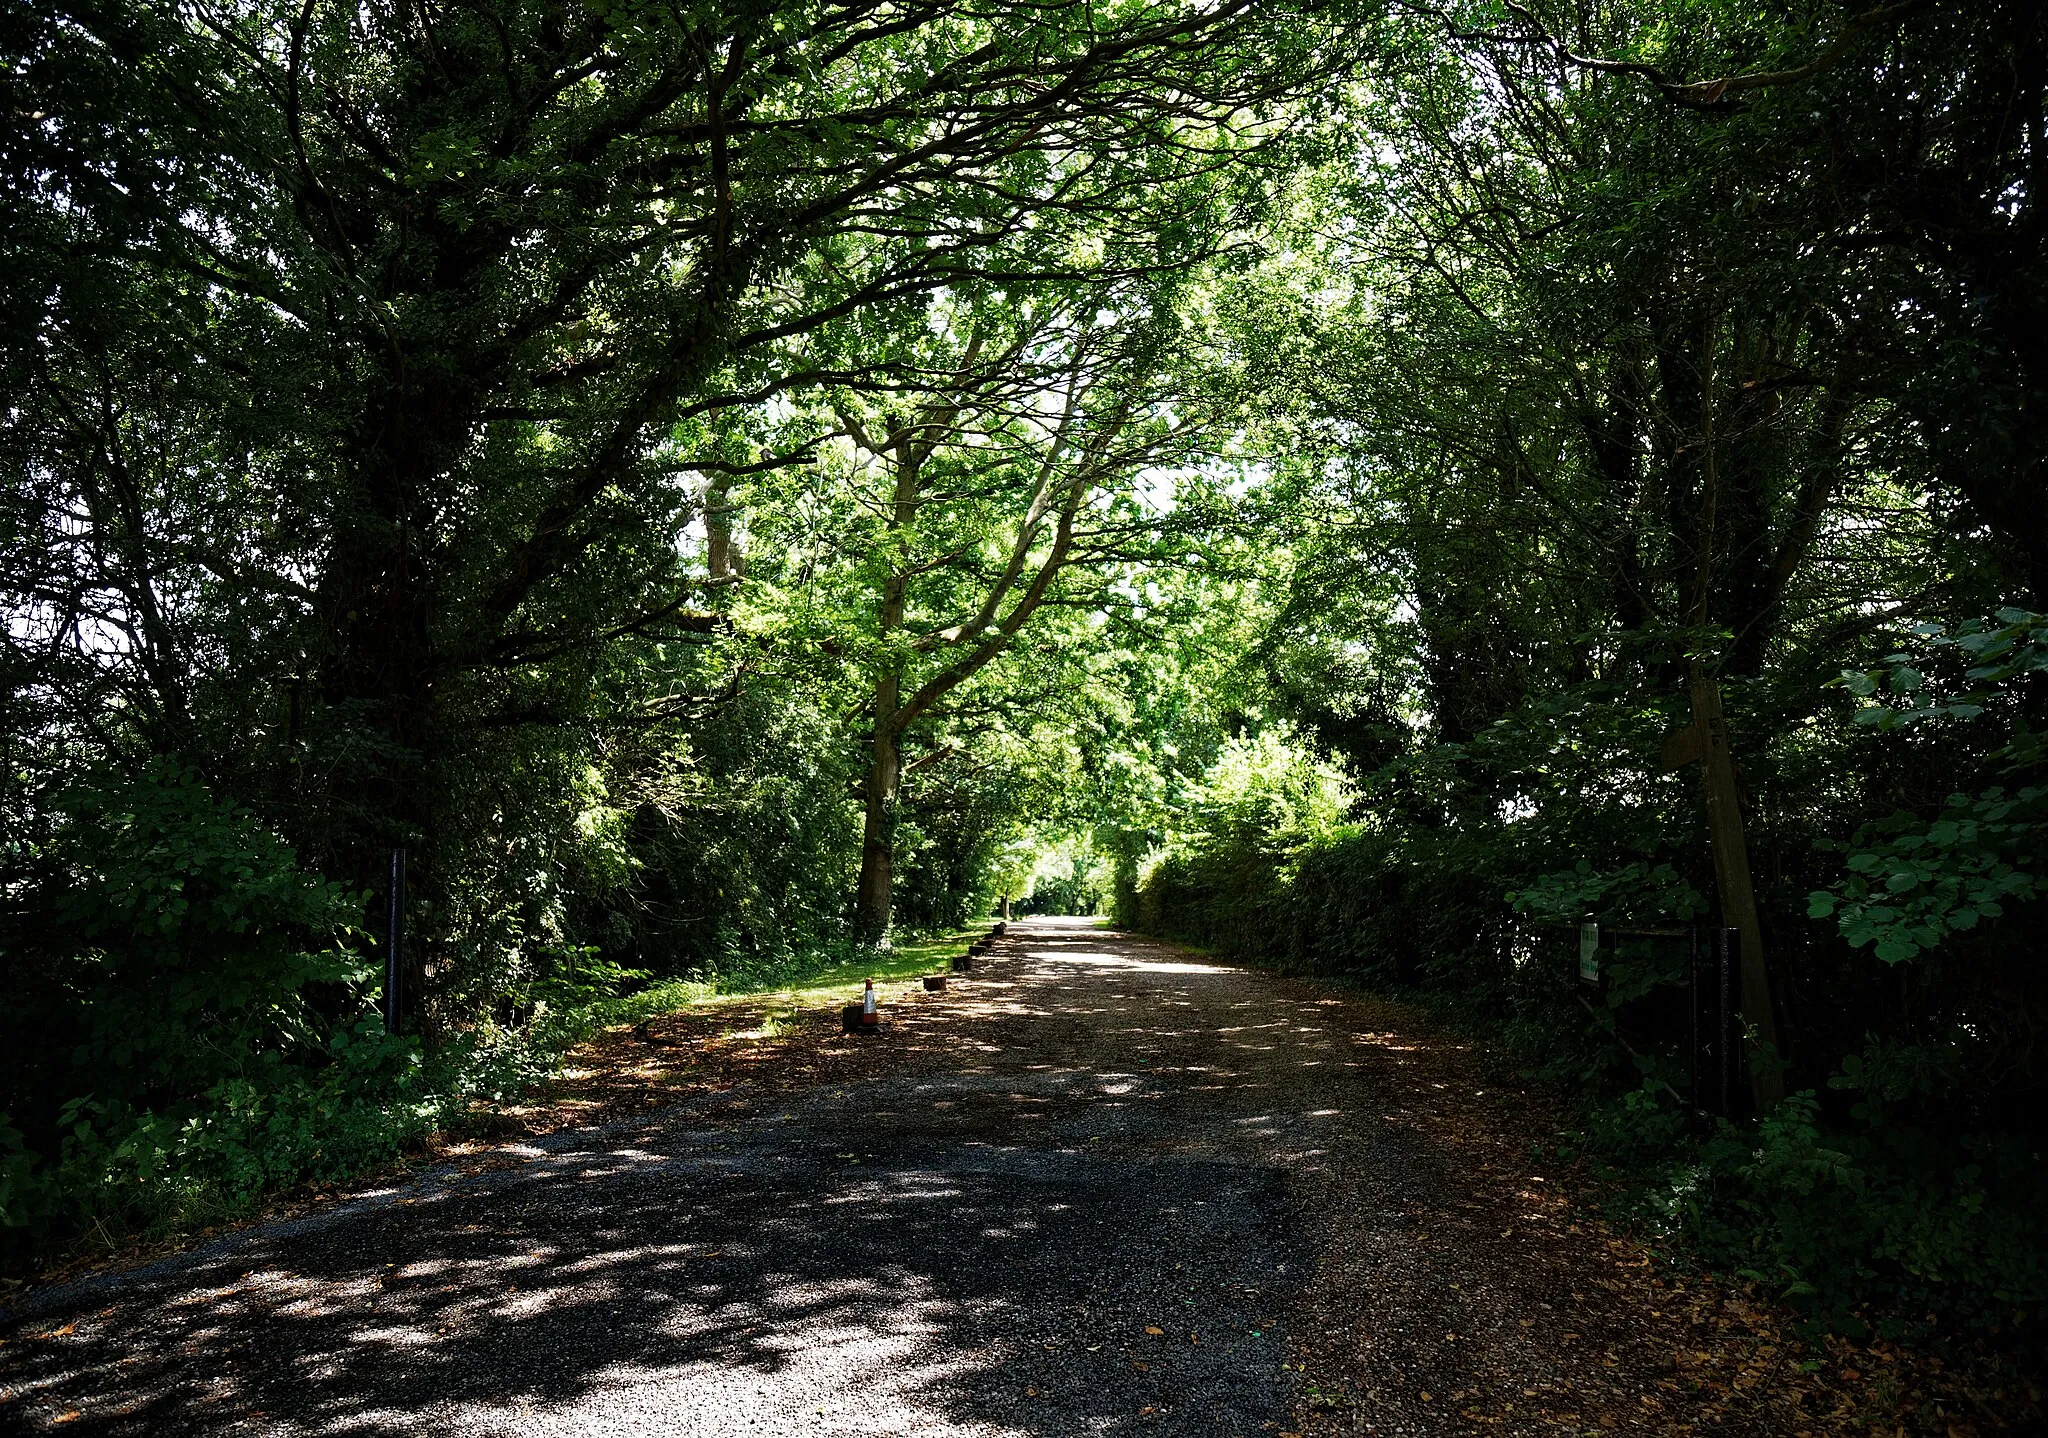 Photo showing: An entrance and driveway in dappled light in the parish of Hatfield Broad Oak, in Essex, England. Mobile device view: Wikimedia (June 2020) makes it difficult to immediately view photo groups related to this image. To see its most relevant allied photos, click on Hatfield Broad Oak, and this uploader's Photos. You can add a click-through 'categories' button to the very bottom of photo-pages you view by going to settings... three-bar icon top left. Desktop view: Wikimedia (June 2020) makes it difficult to immediately view the helpful category links where you can find images related to this one in a variety of ways; for these go to the very bottom of the page. This image is one of a series of date and/or subject allied consecutive photographs kept in progression or location by file name number and/or time marking. Camera: Canon EOS 6D Mark II with Canon EF 24-105mm F4L IS USM lens. Software: File lens-corrected, optimized, perhaps cropped, with DxO OpticsPro Elite, and likely further optimized with Adobe Photoshop CS2.